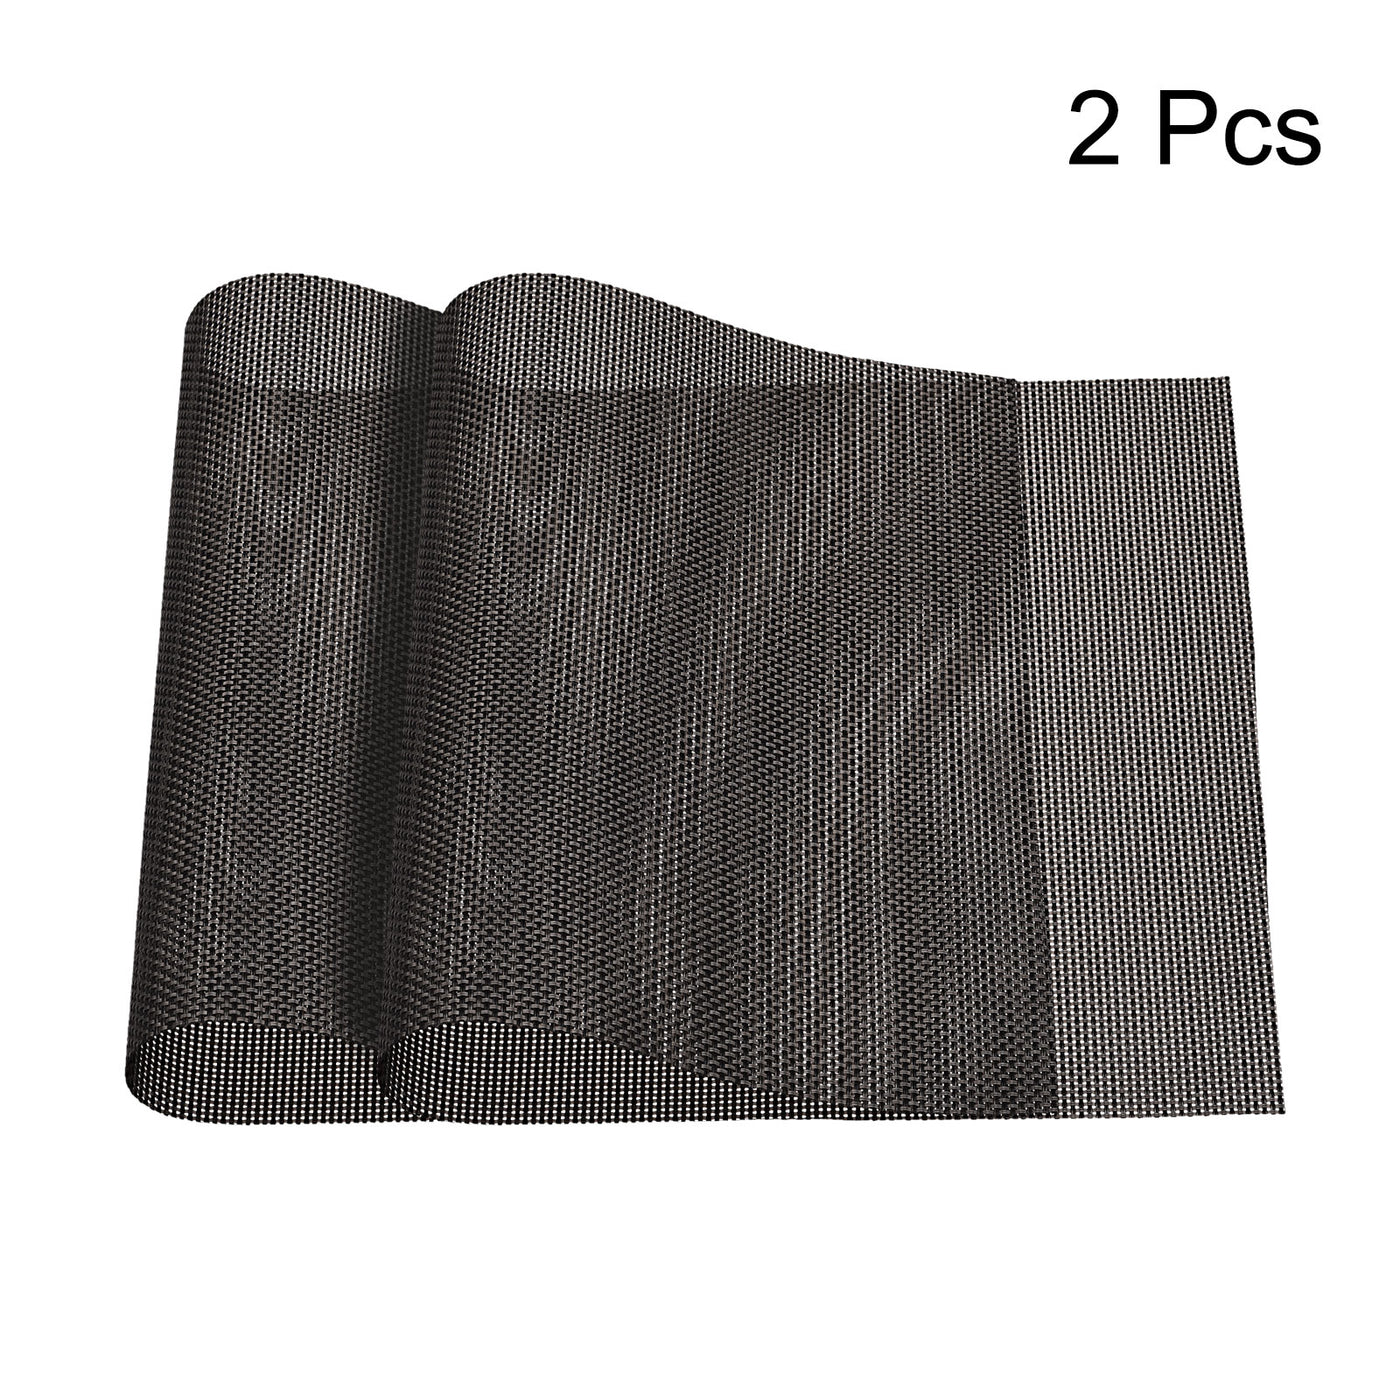 uxcell Uxcell Place Mats, 450x300mm Table Mats Set of 2 PVC Washable Woven Placemat Brown